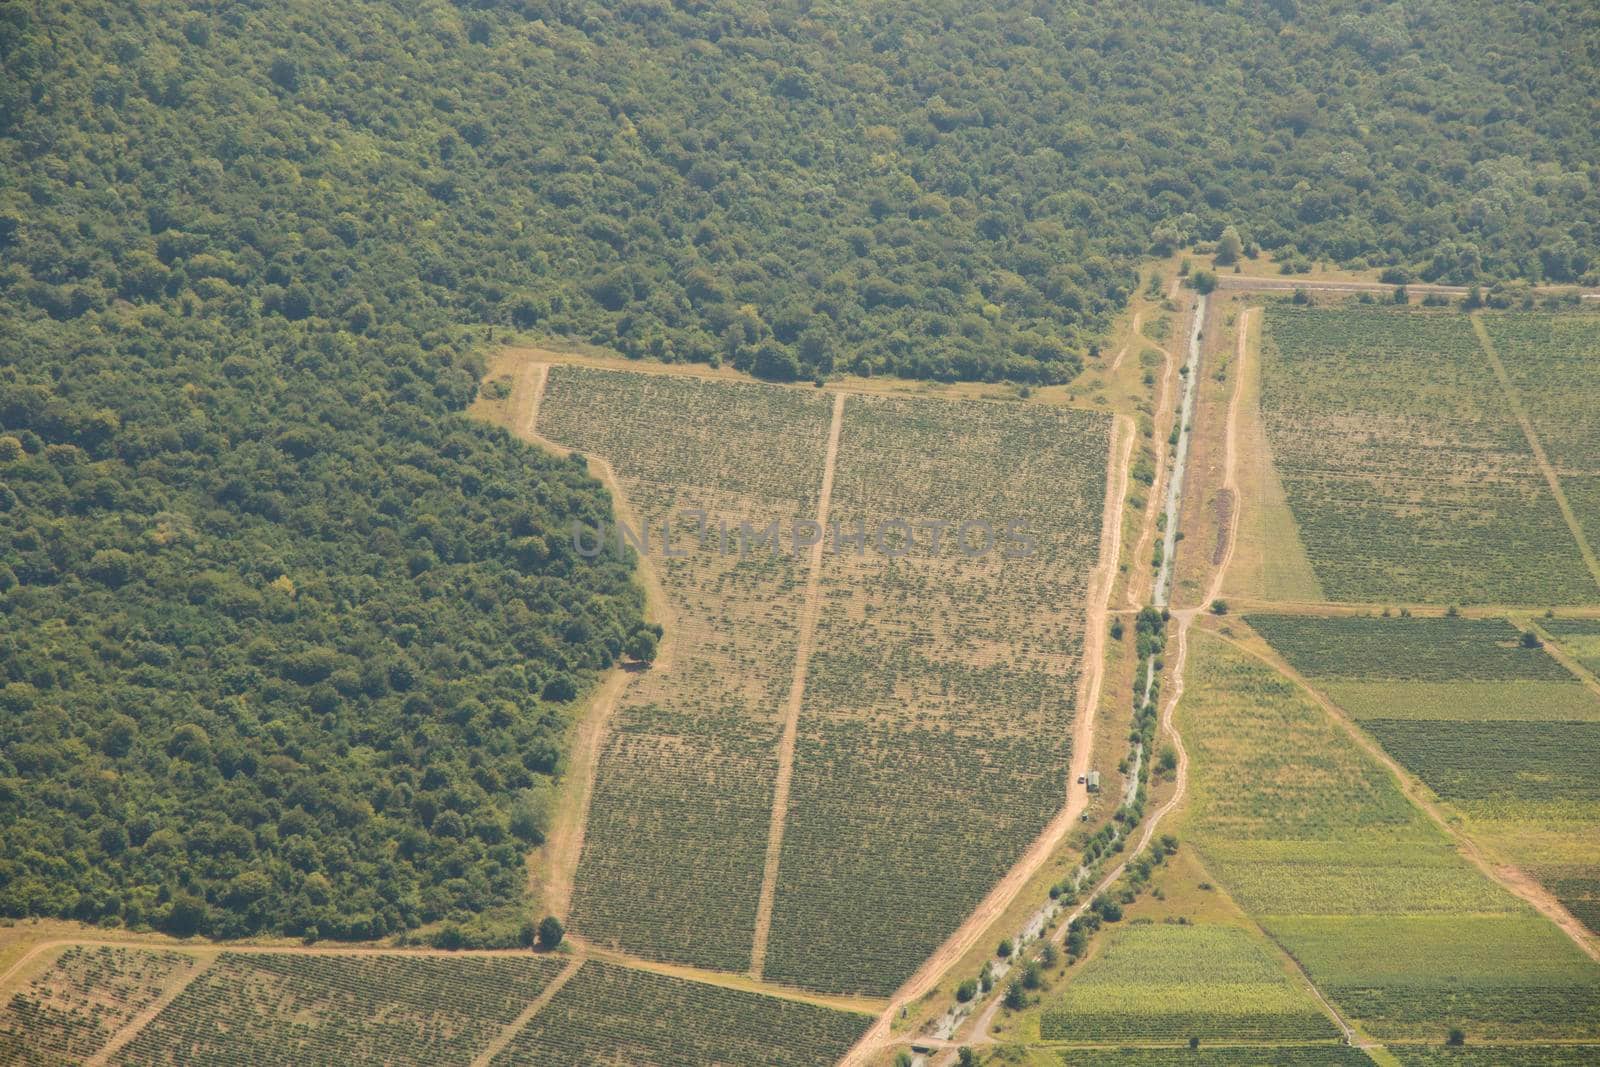 Telavi view and landscape from the helicopter, Georgian nature and beautiful fields, agriculture